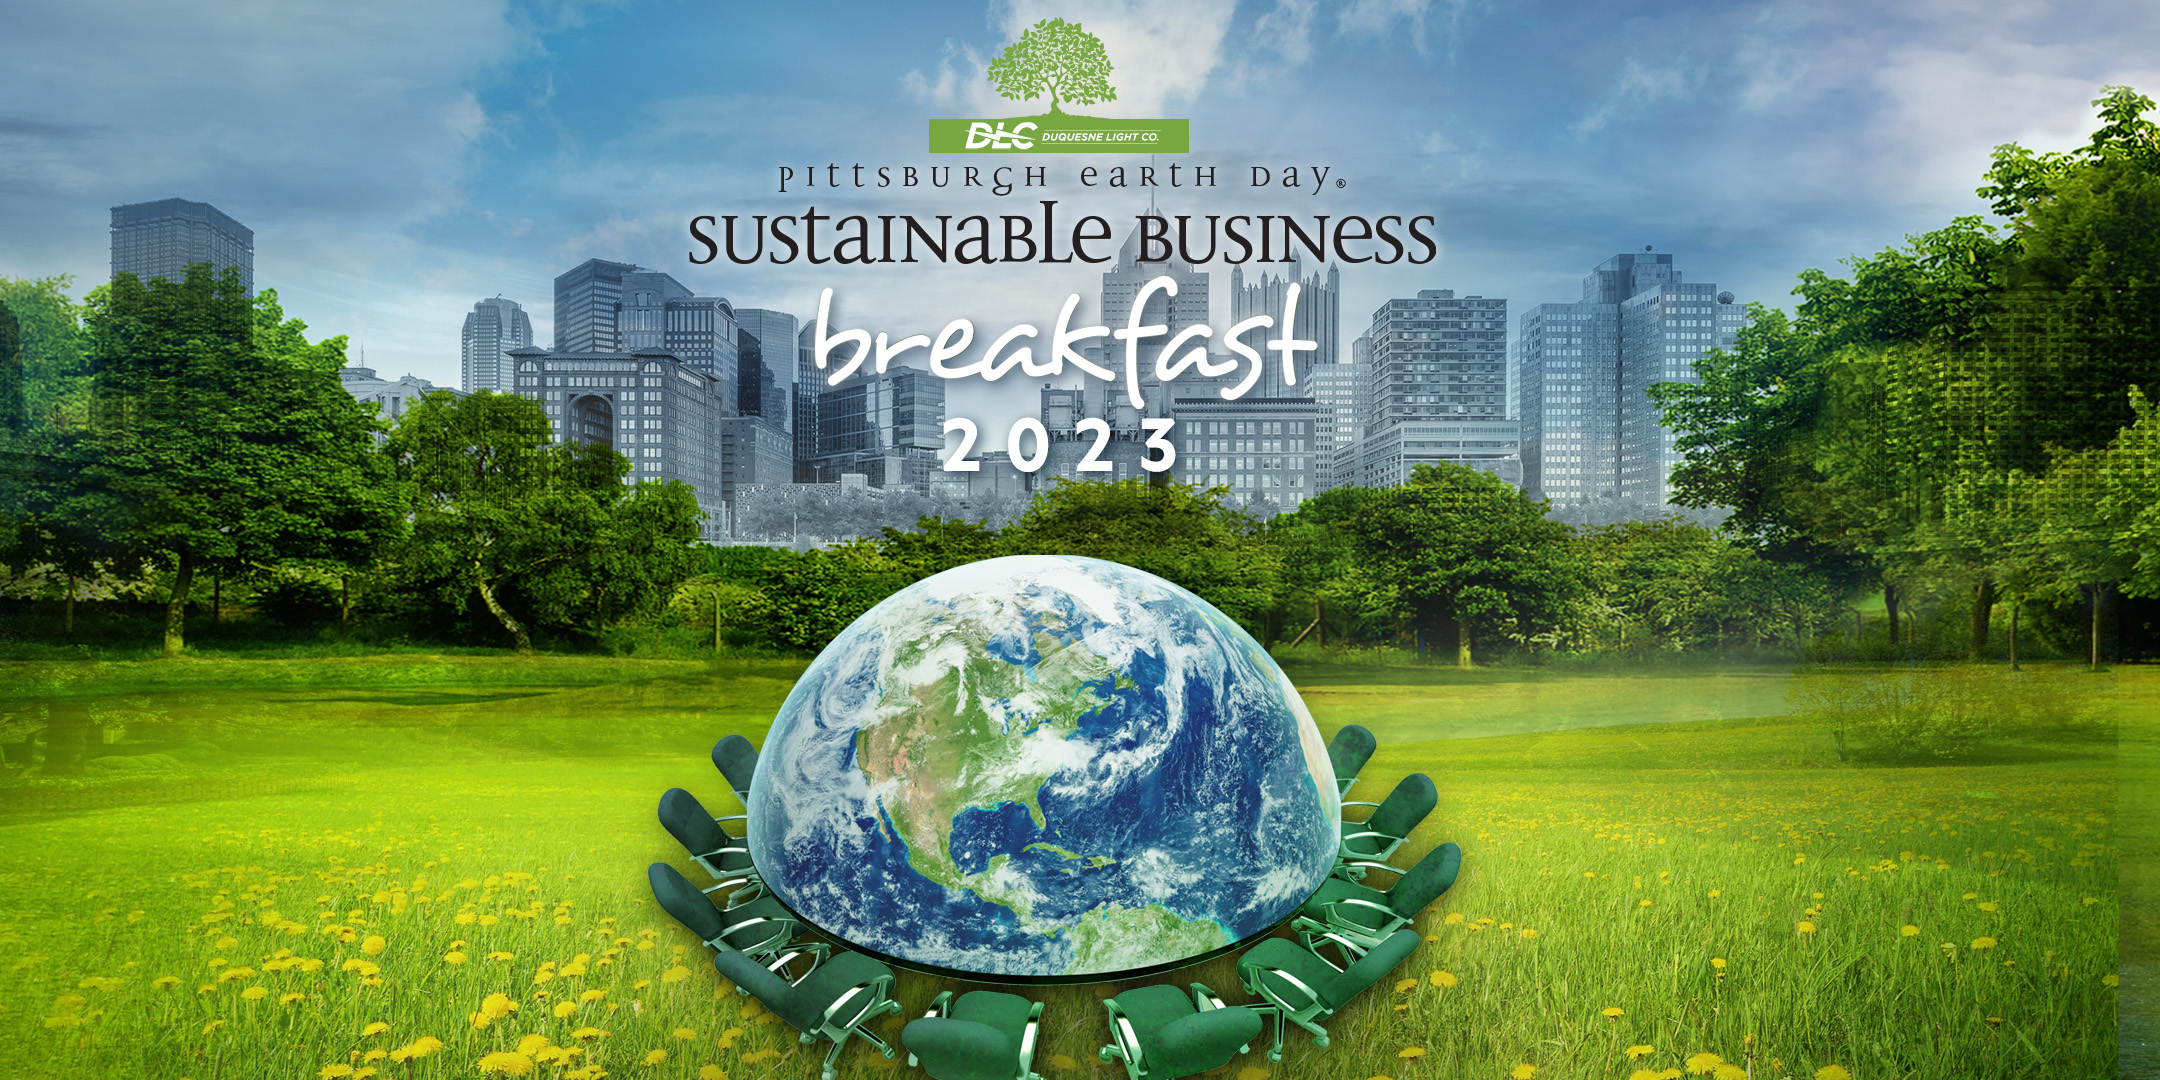 Poster for the Sustainable Business Breakfast, hosted by Pittsburgh Earth Day